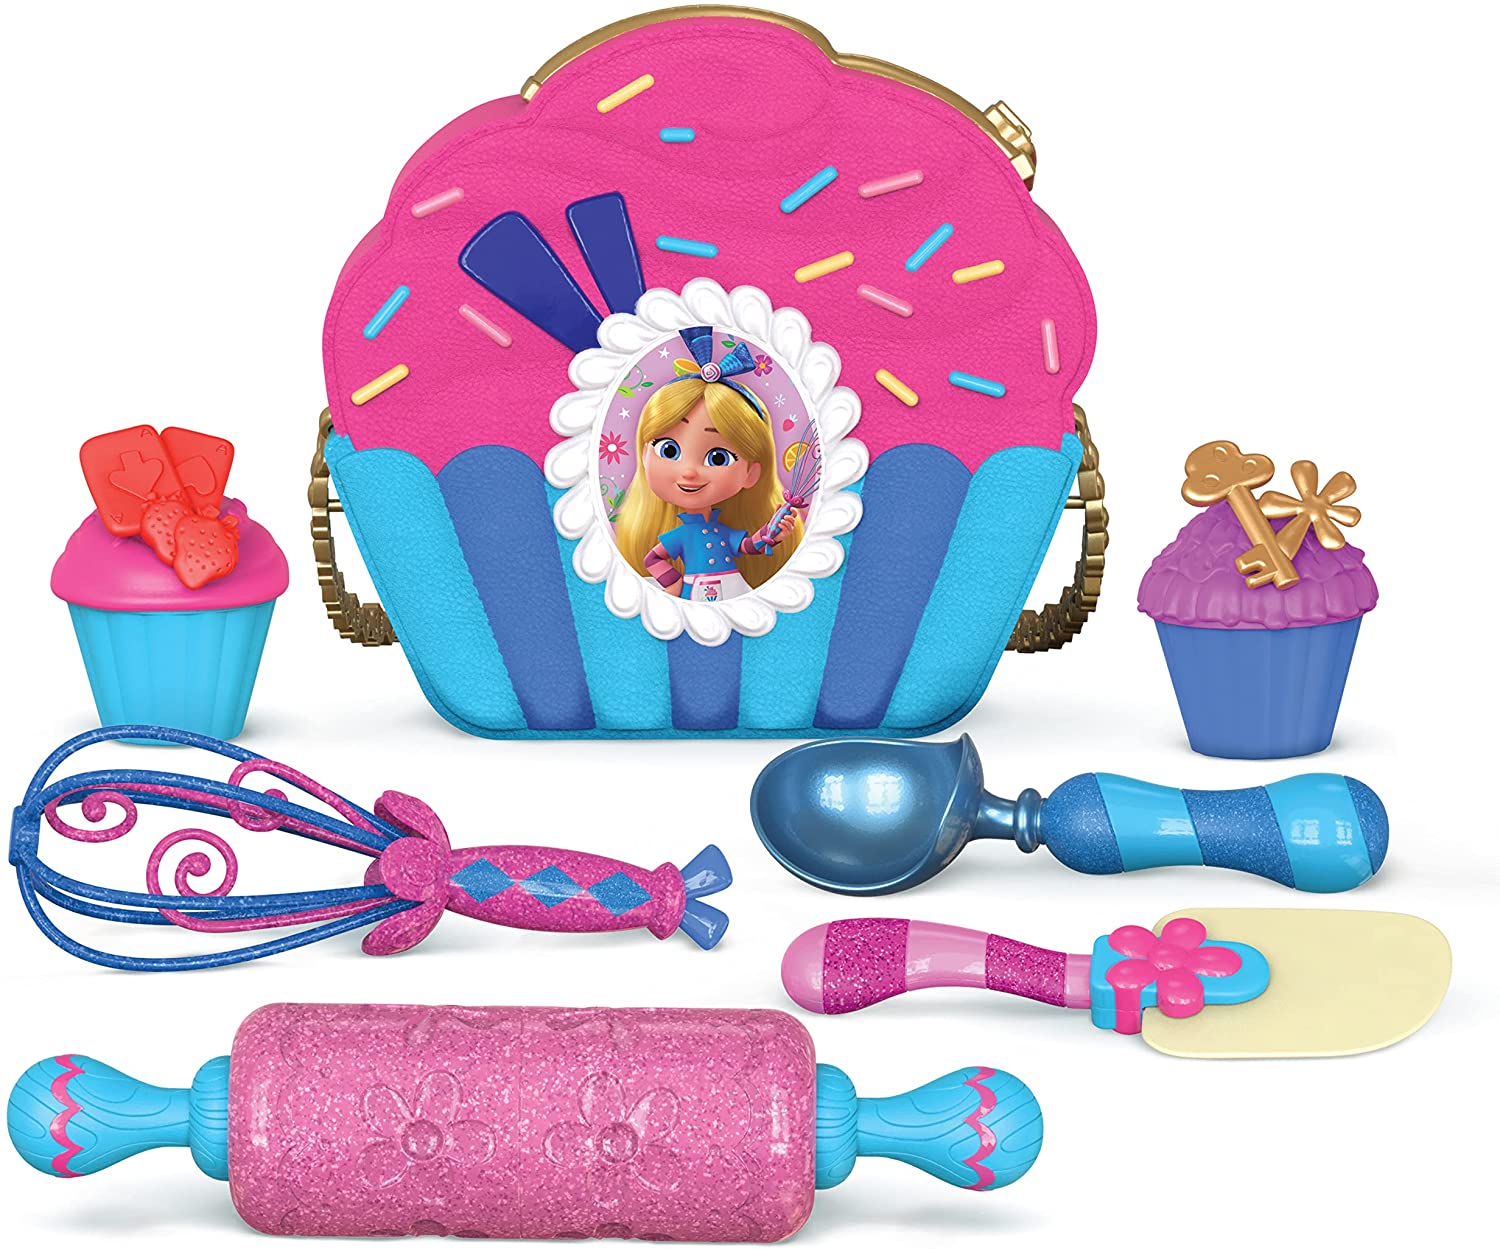 Disney Junior Alice's Wonderland Bakery 10-inch Alice & Magical Oven Doll  and Accesory Set, Officially Licensed Kids Toys for Ages 3 Up by Just Play  : Toys & Games 